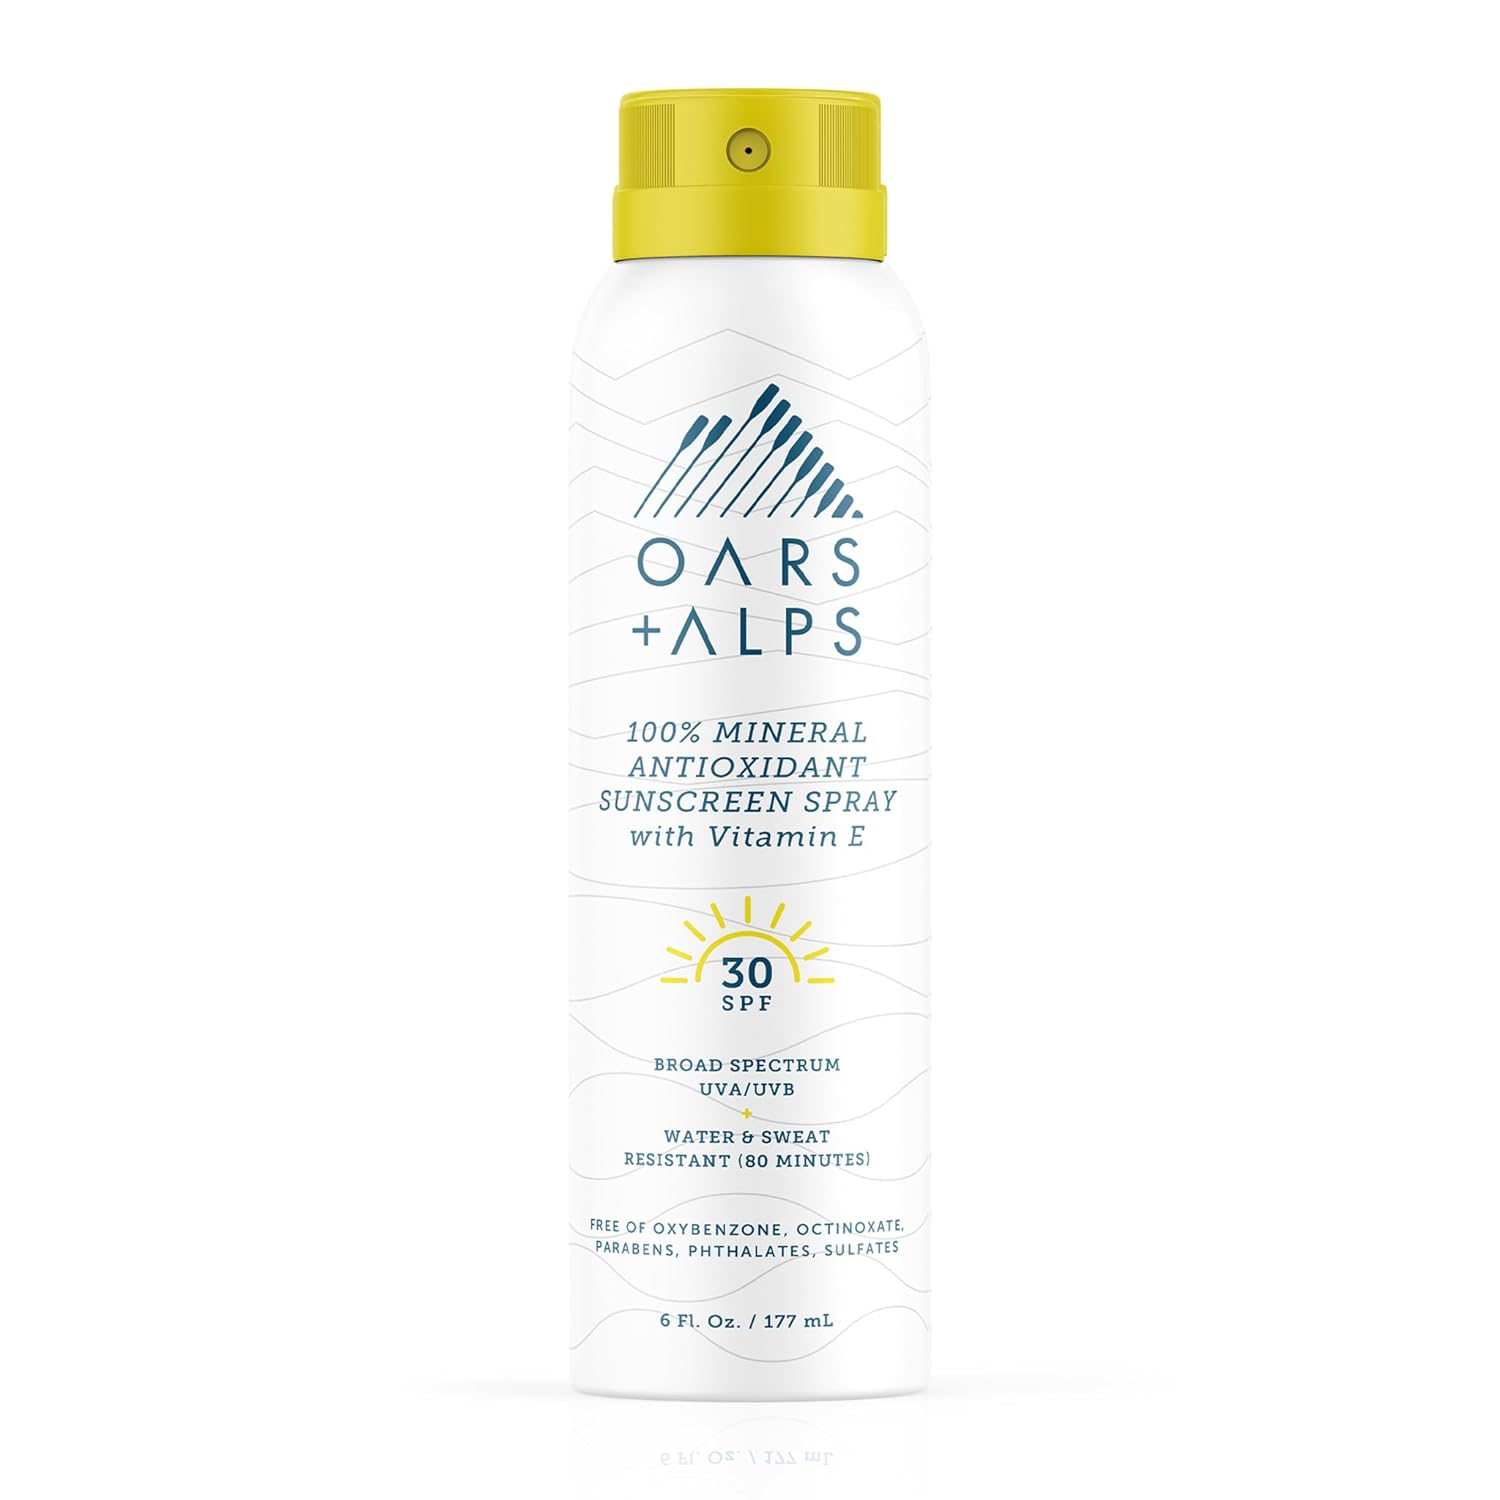 Oars + Alps Mineral SPF 30 Sunscreen Spray, Infused with Vitamin E and Antioxidants, Water and Sweat Resistant, 6 Oz, 2 Pack